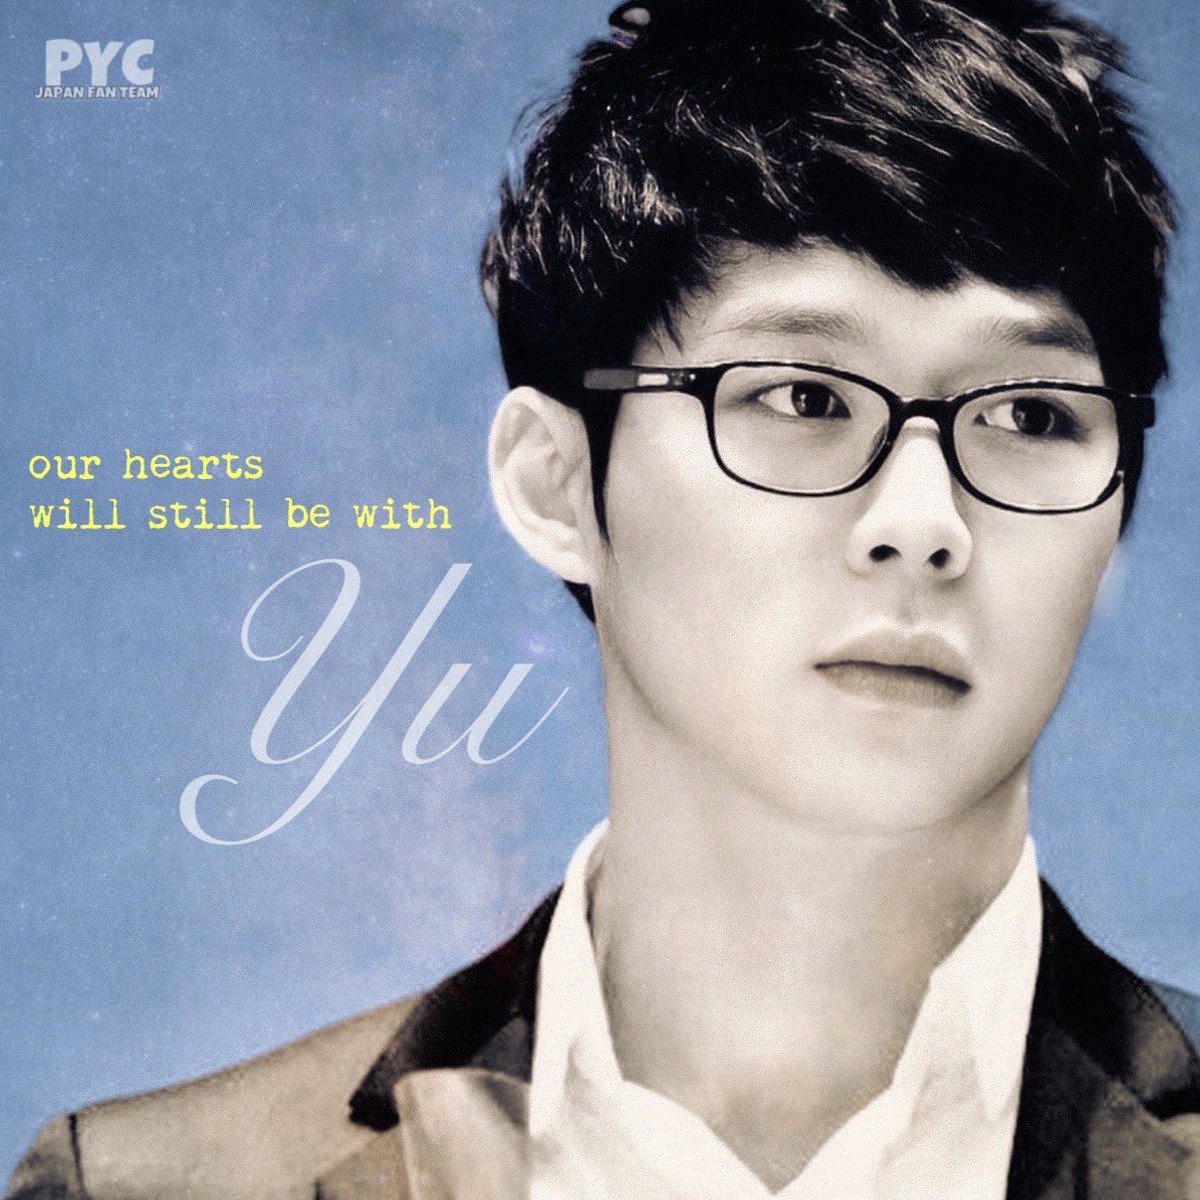 Even if YU are far away, our hearts will still be with YU. YUが遠くにいても♡は一緒に #ユチョン #parkyuchun